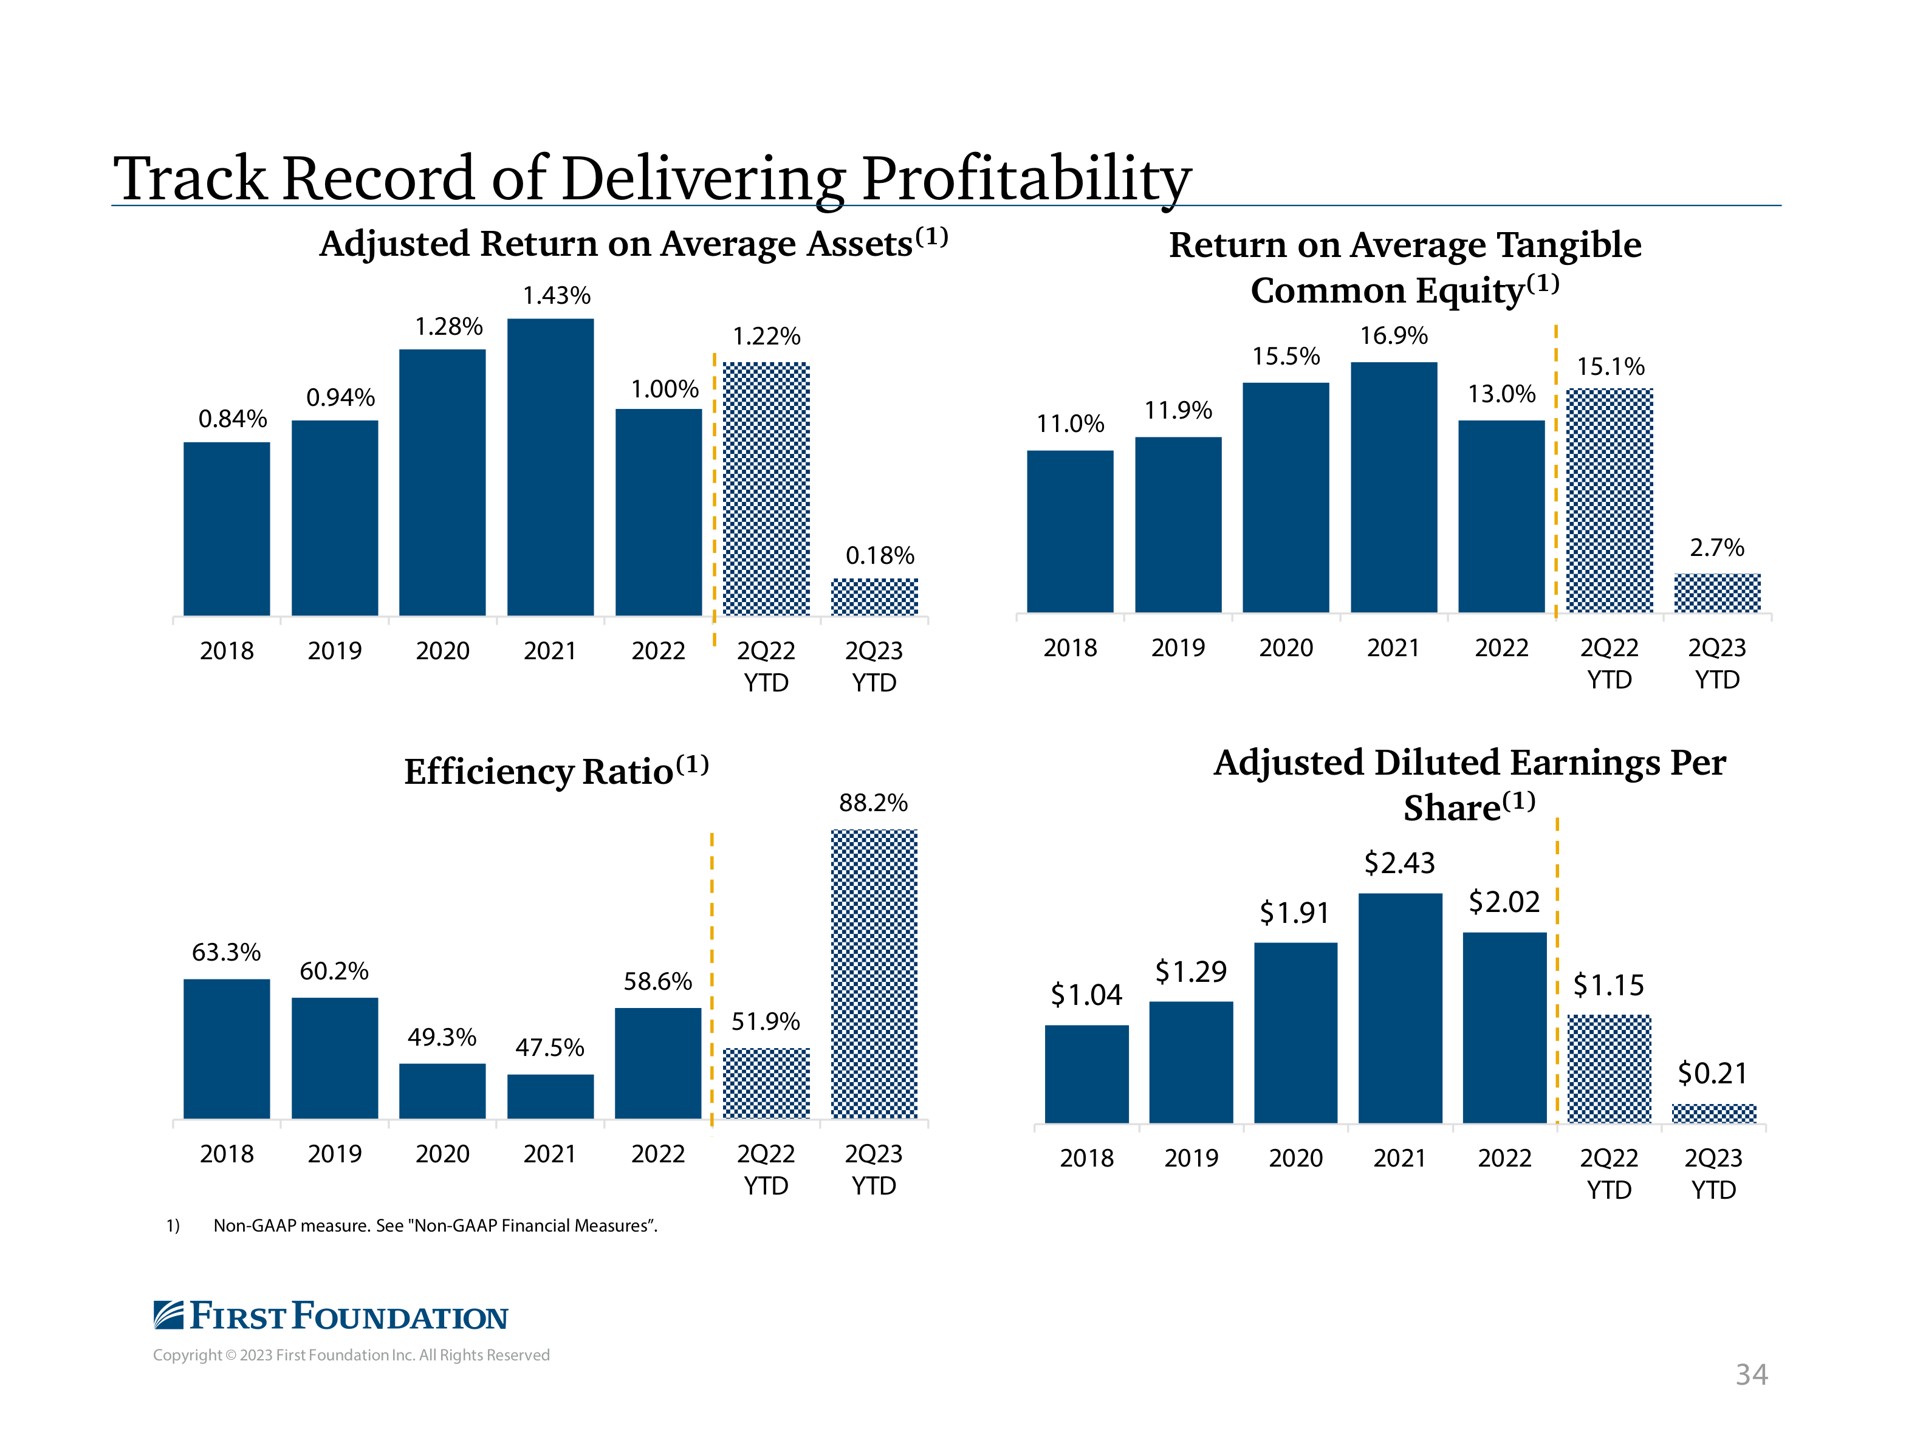 track record of delivering profitability adjusted return on average assets efficiency ratio return on average tangible common equity adjusted diluted earnings per share a | First Foundation